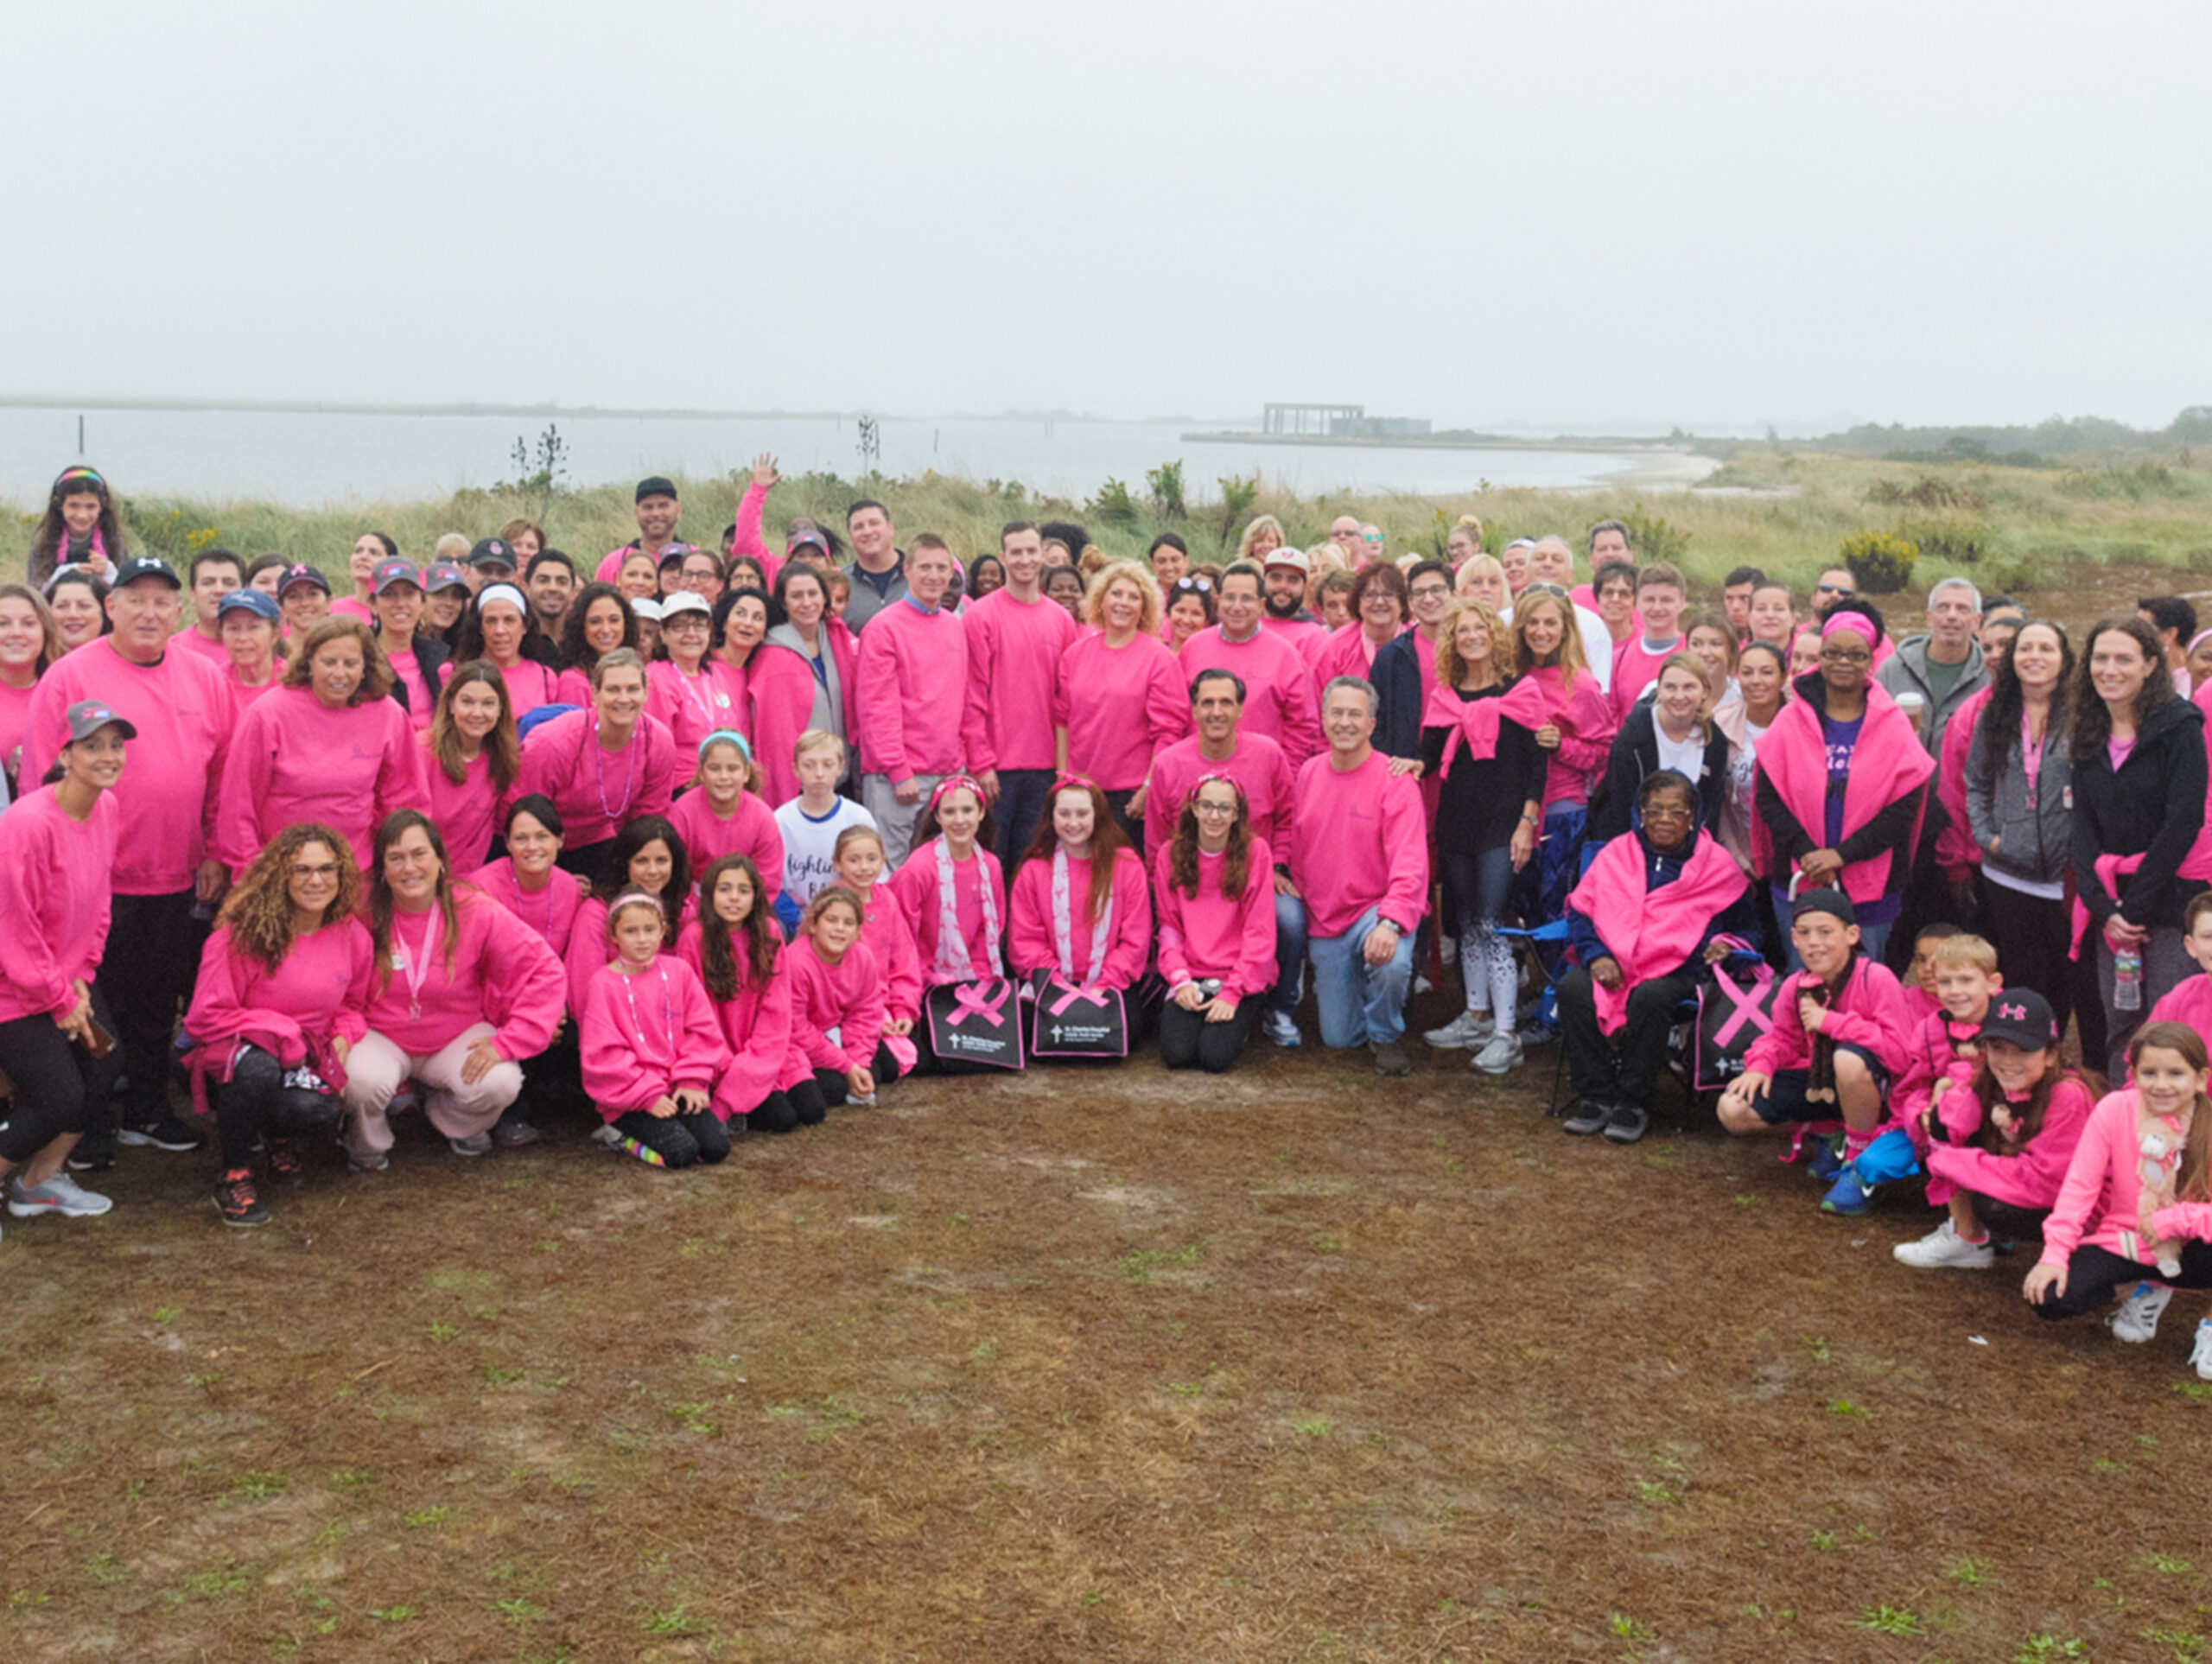 NYBRA Plastic Surgery team in pink sweatshirts pose together for the camera in group shot.